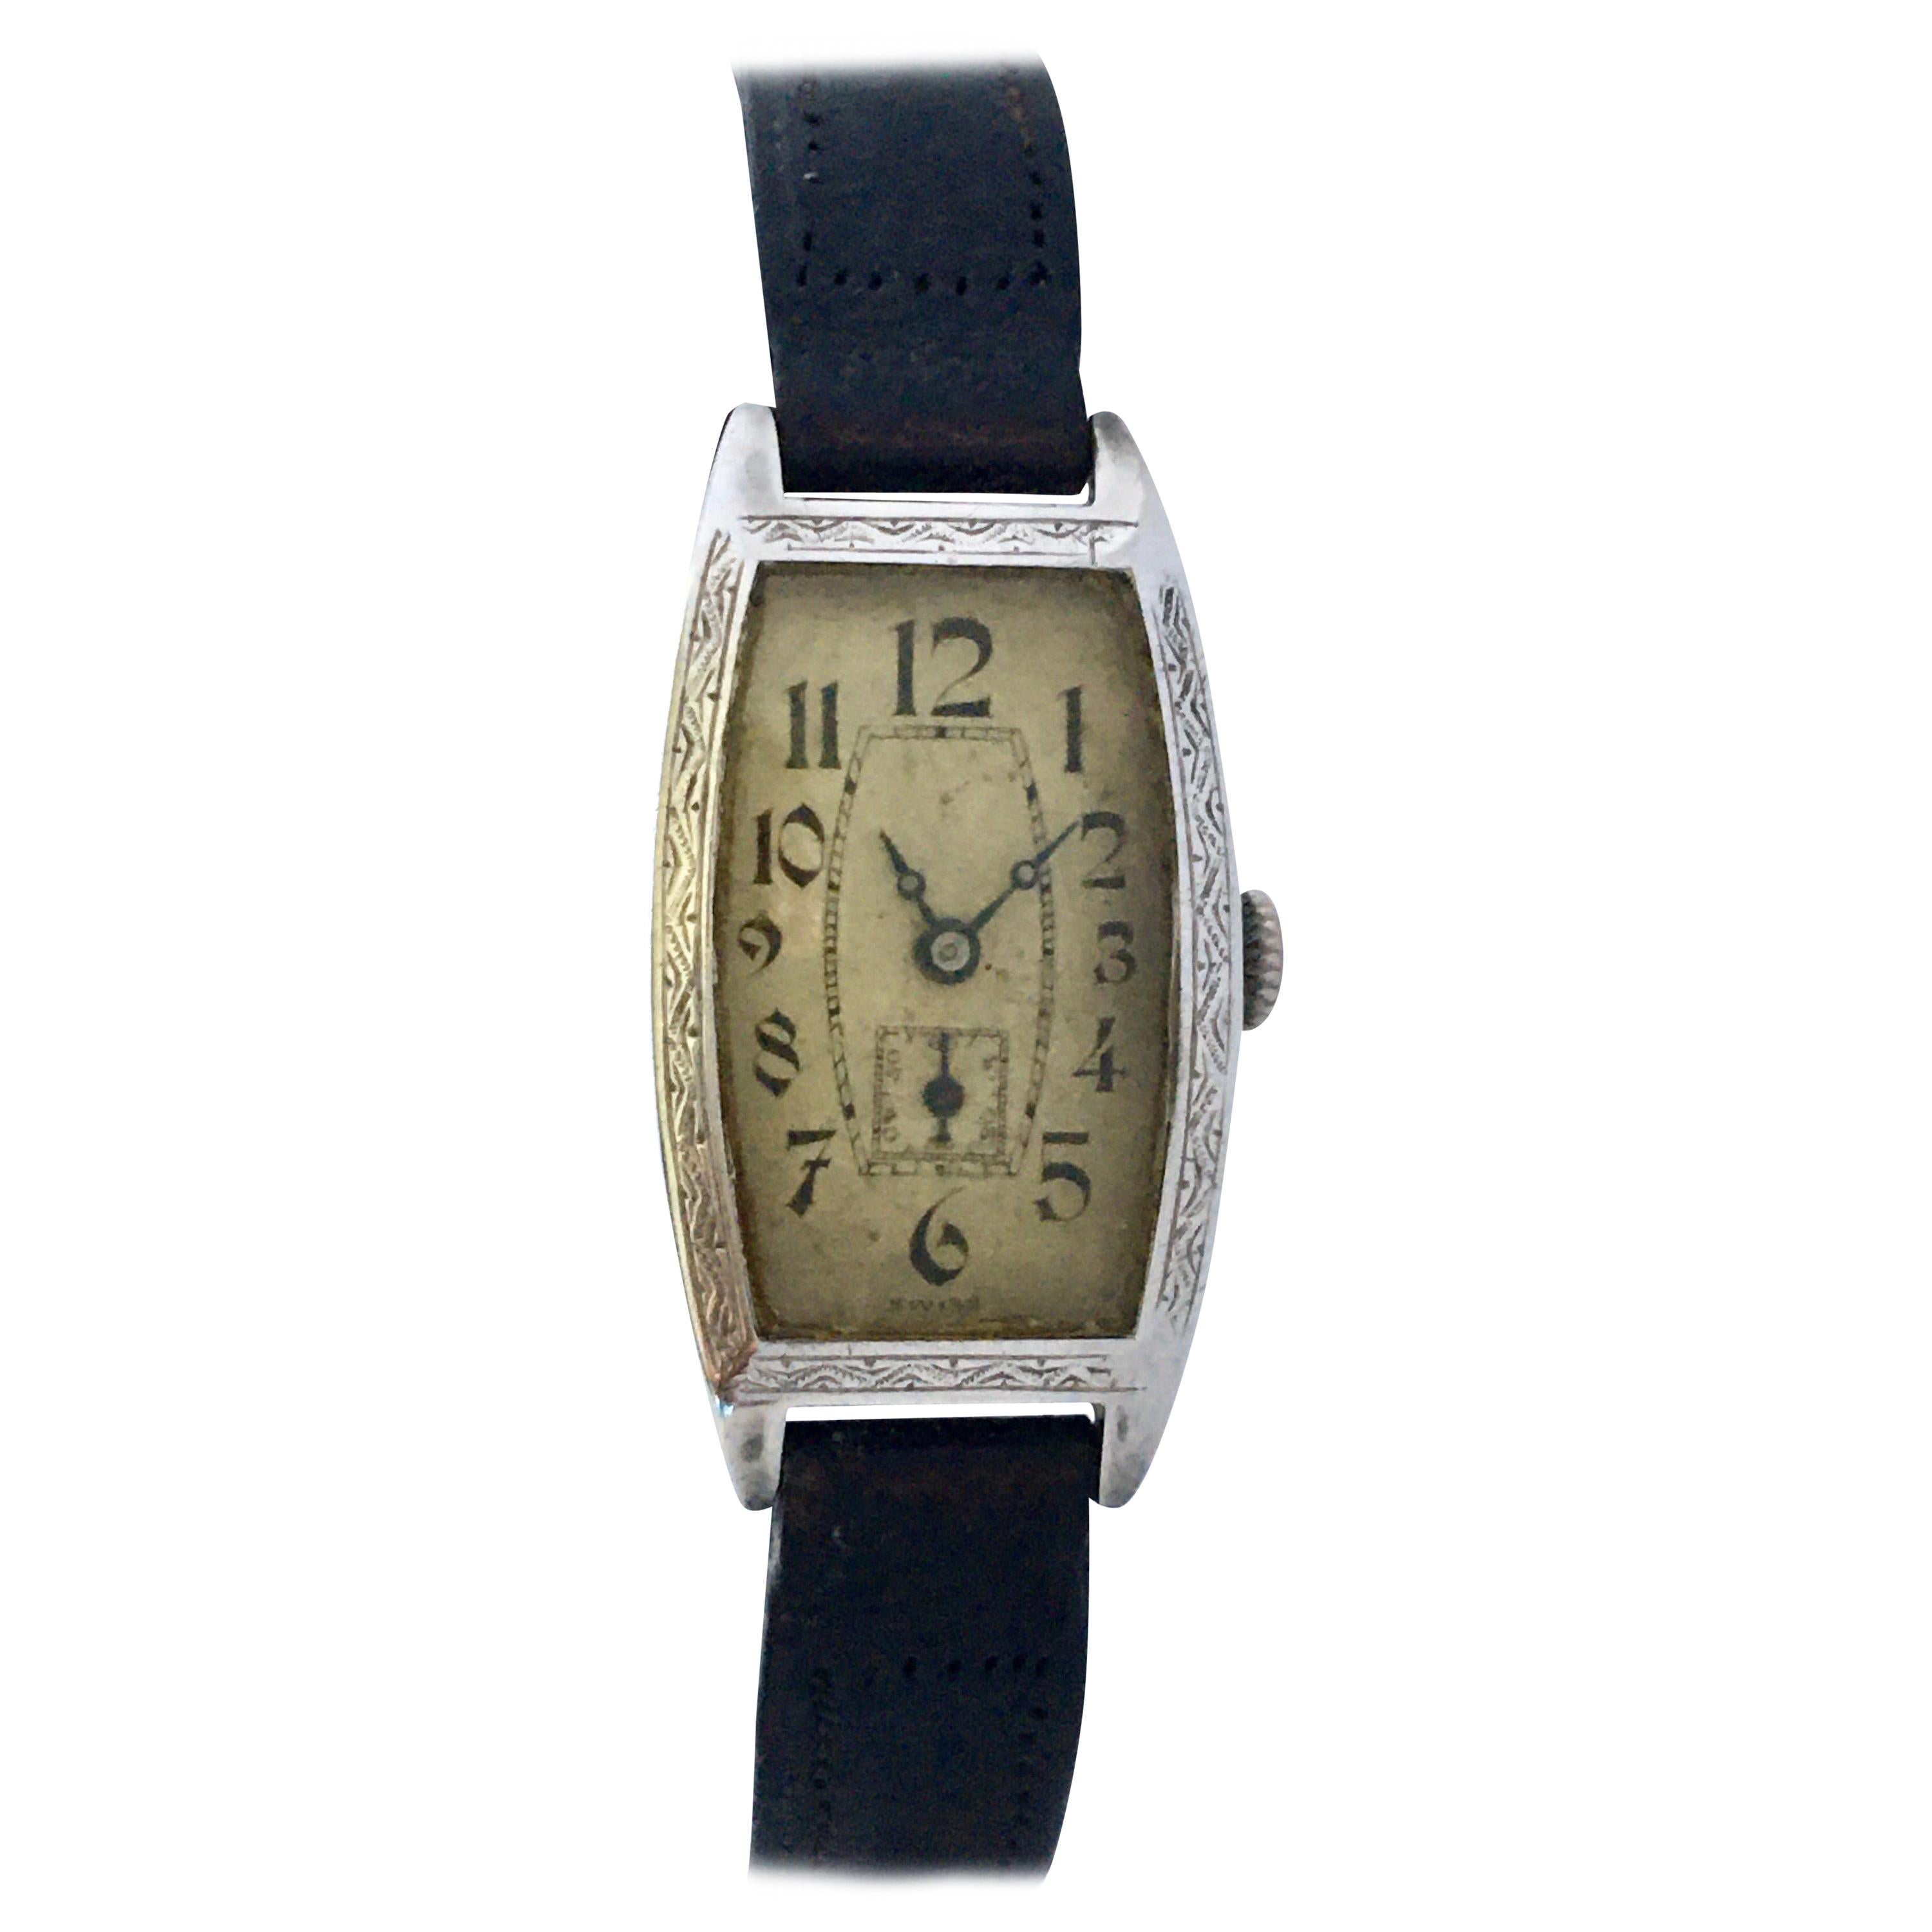 Vintage 1930s Silver Invicta Mechanical Watch